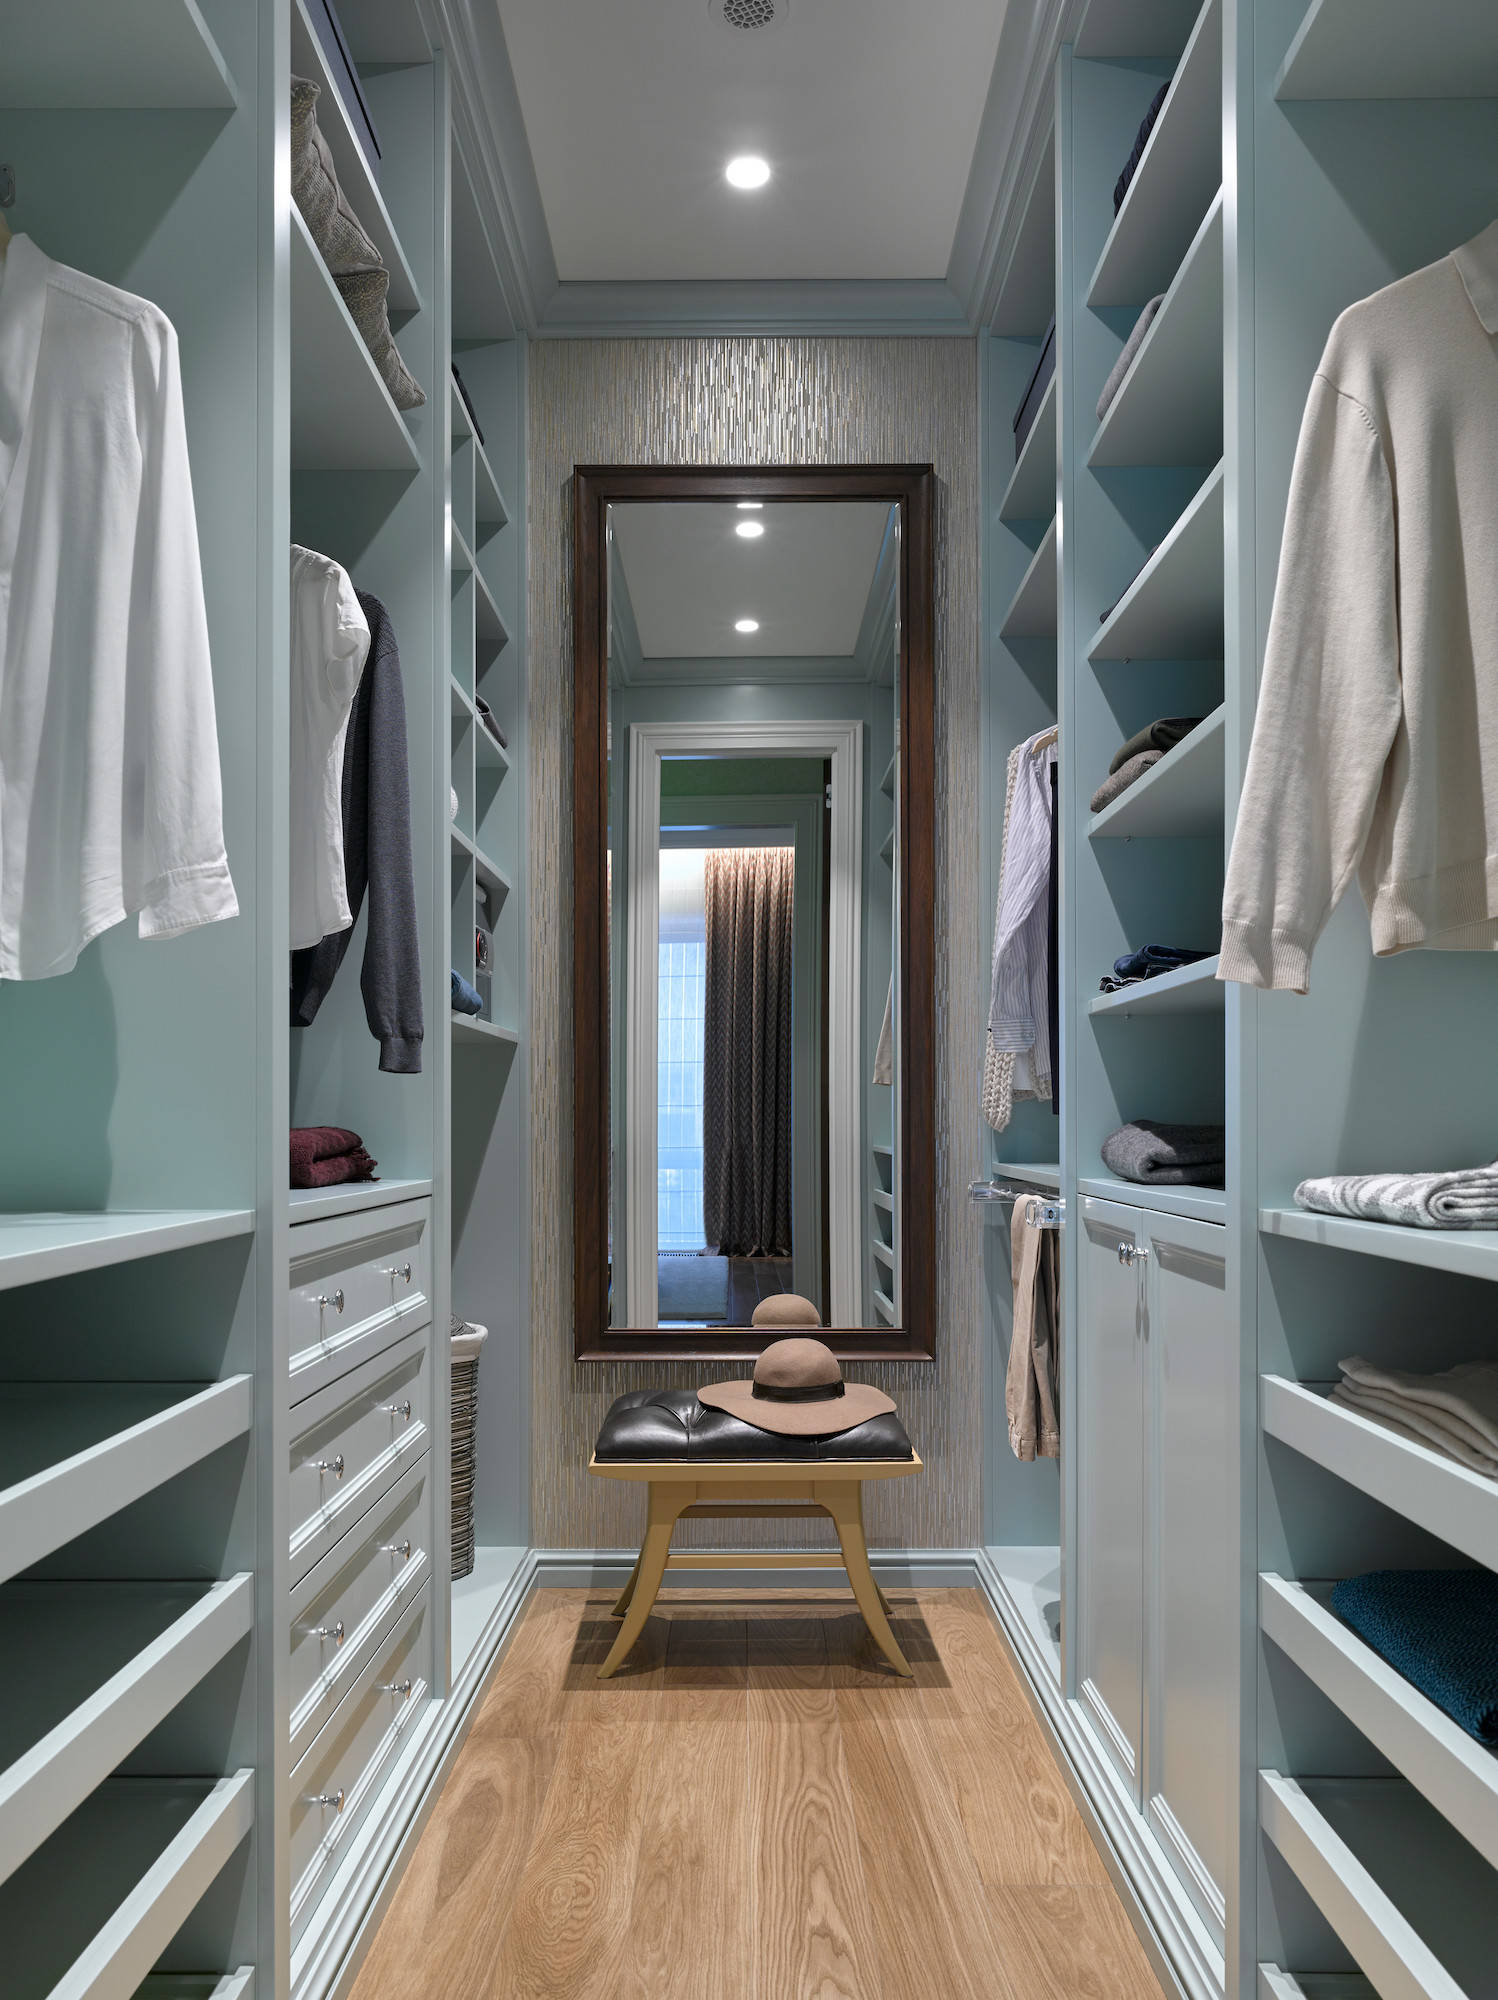 18 Beautiful Small Closet Pictures Ideas October 2020 Houzz,Small Pool House Plans With Bedroom